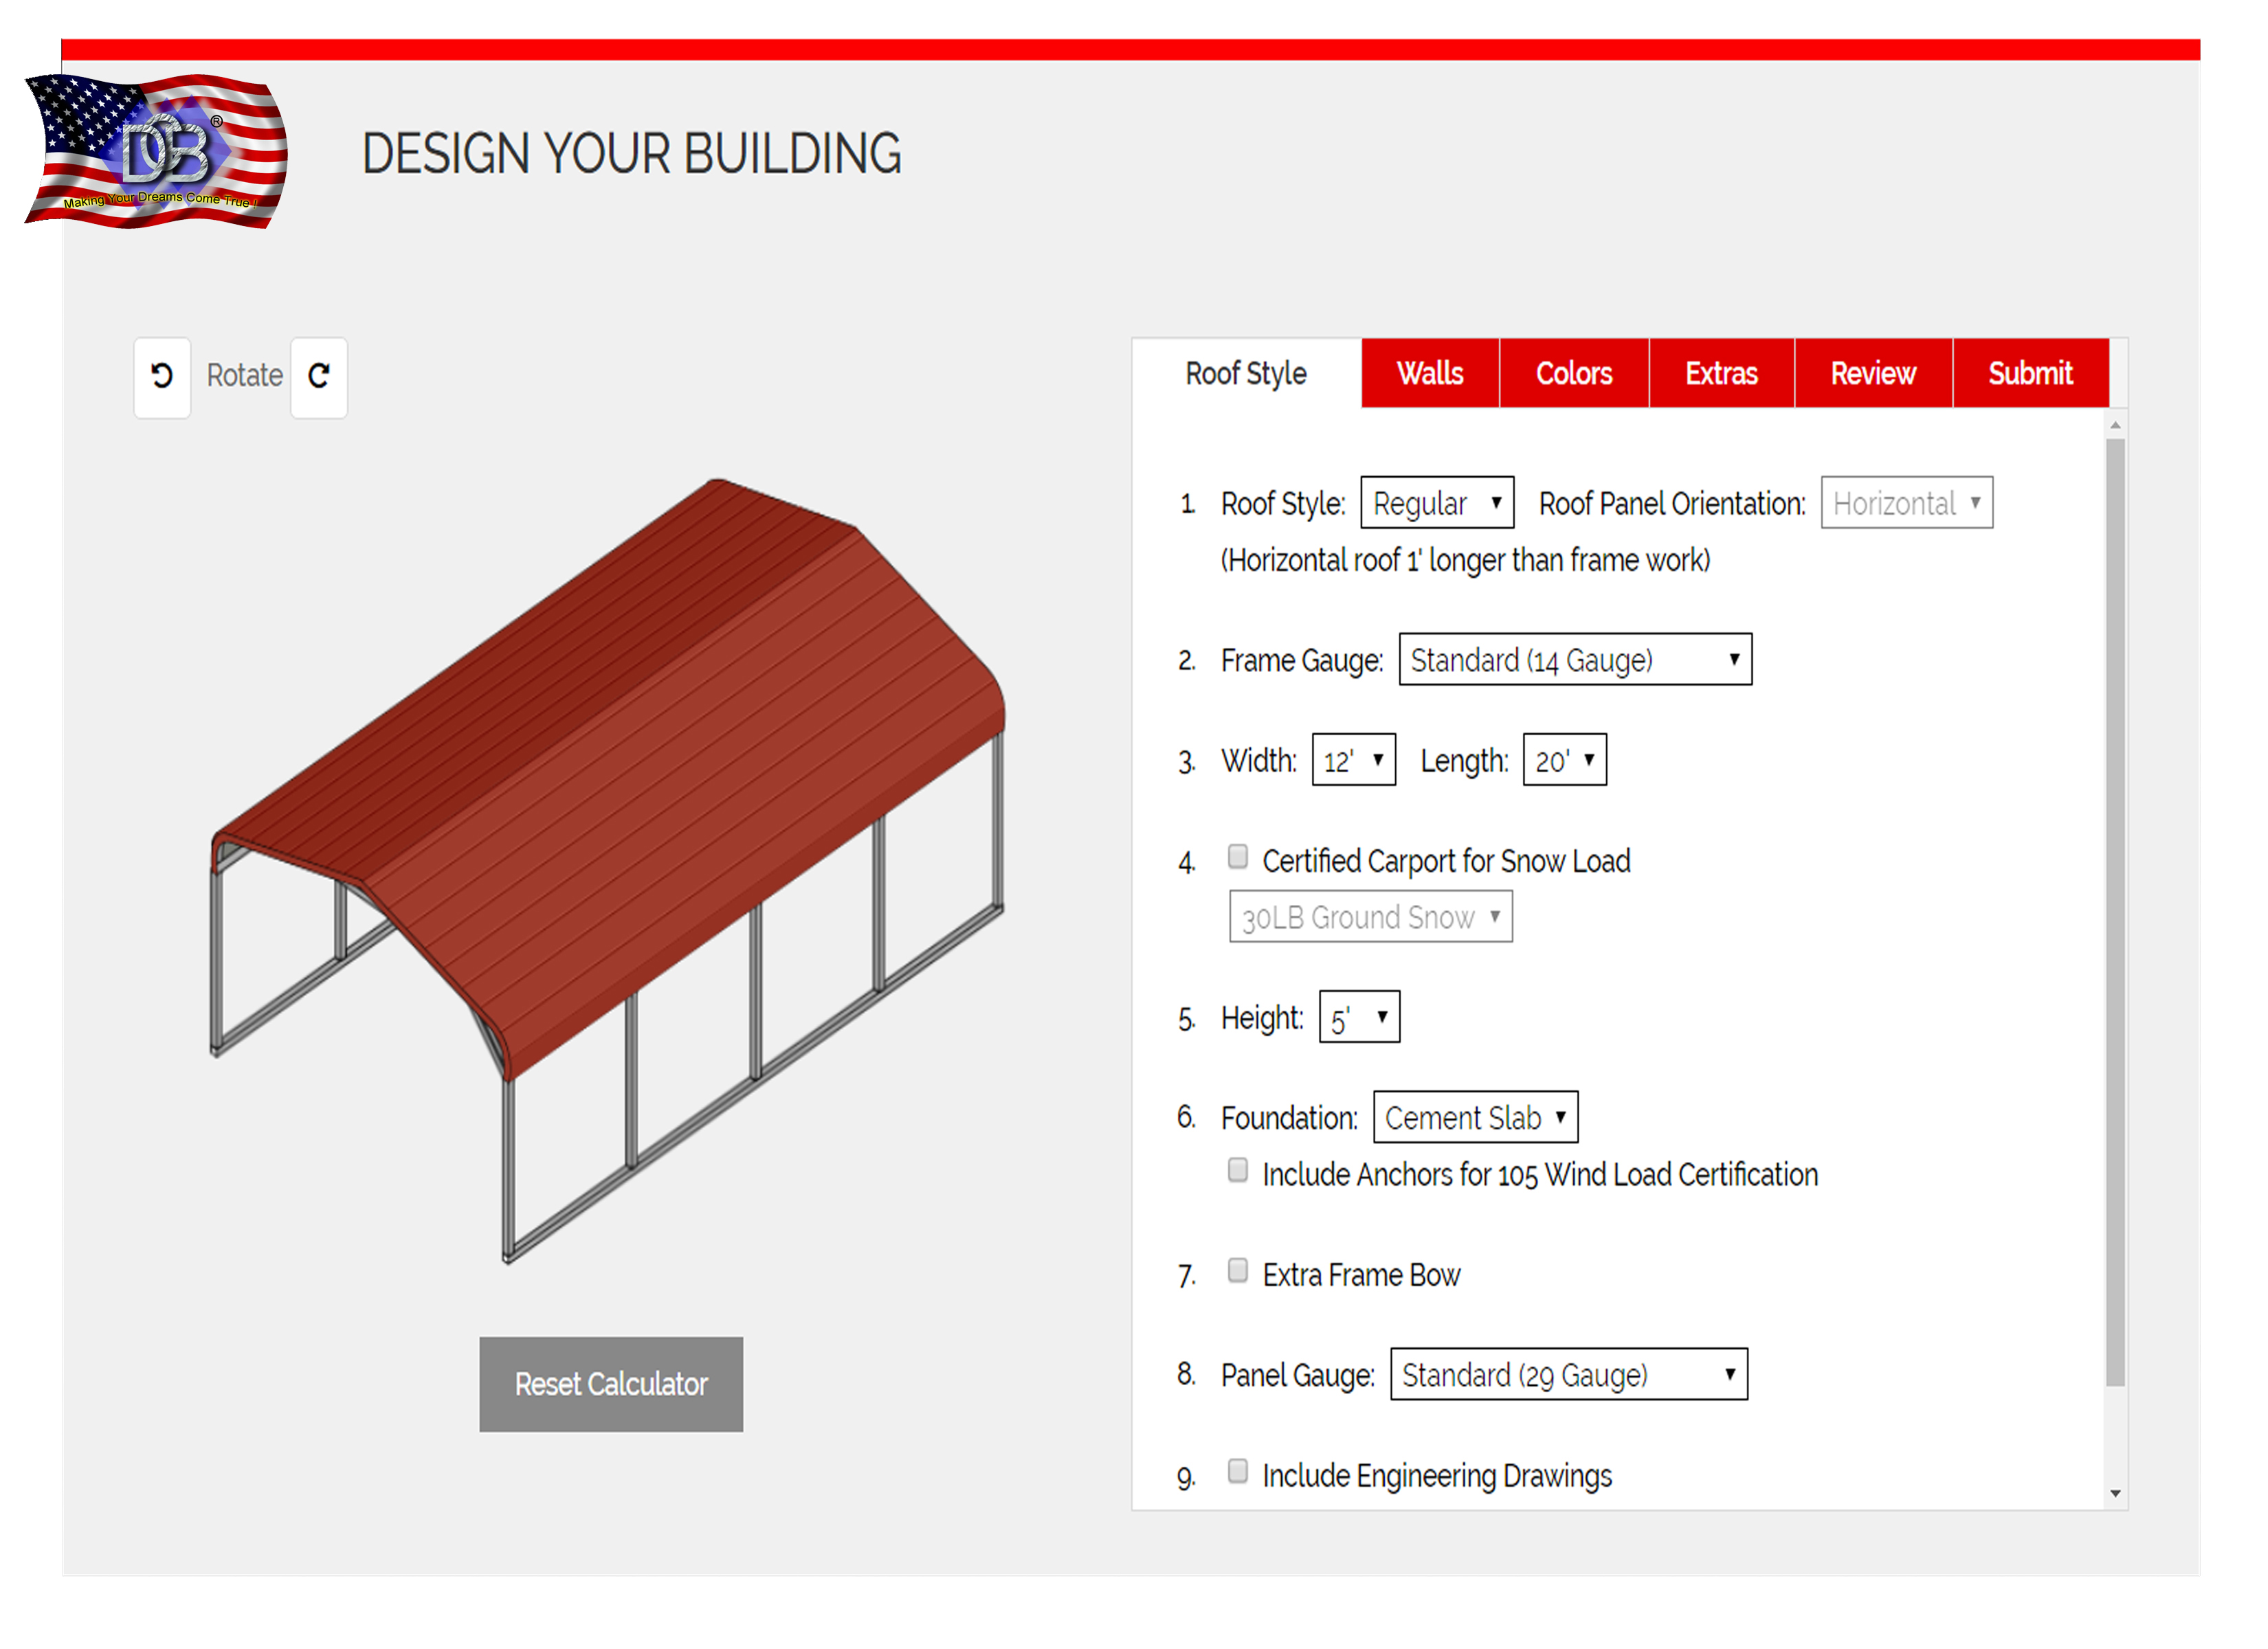 Design your own building image